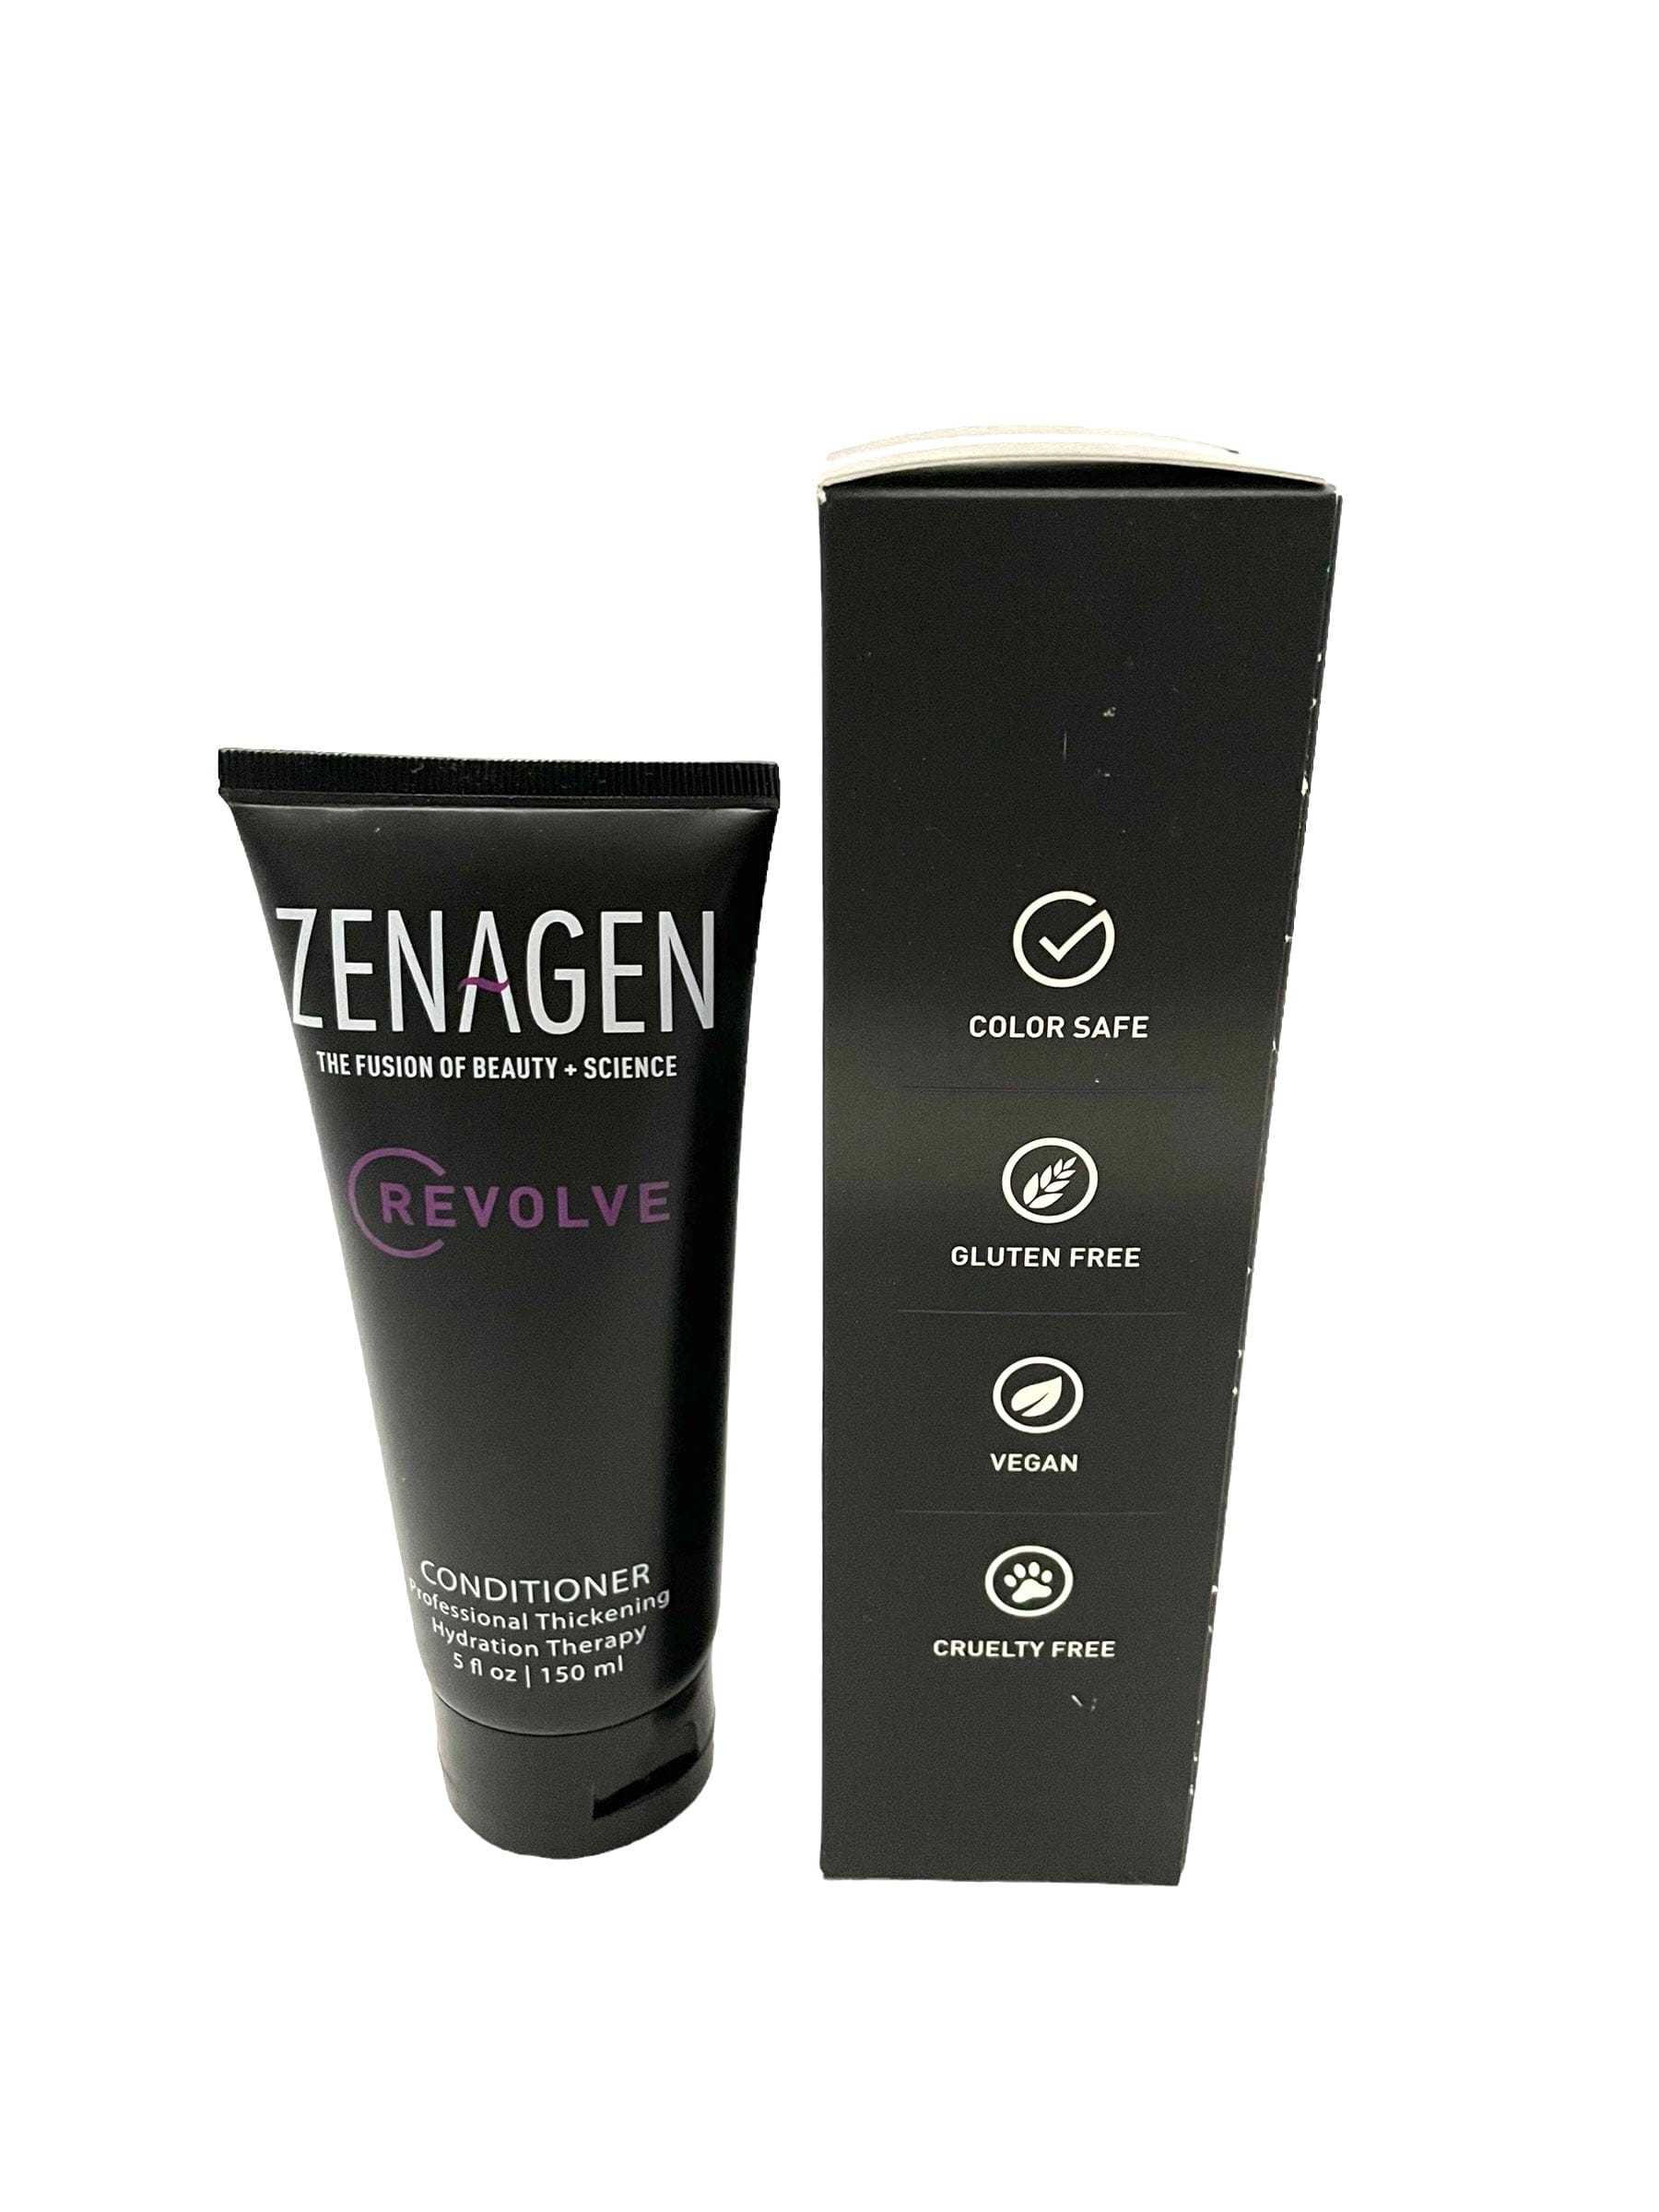 Hair Loss Conditioner Zenagen Revolve Professional Thickening Hydration Therapy 5 oz Hair Loss Conditioner